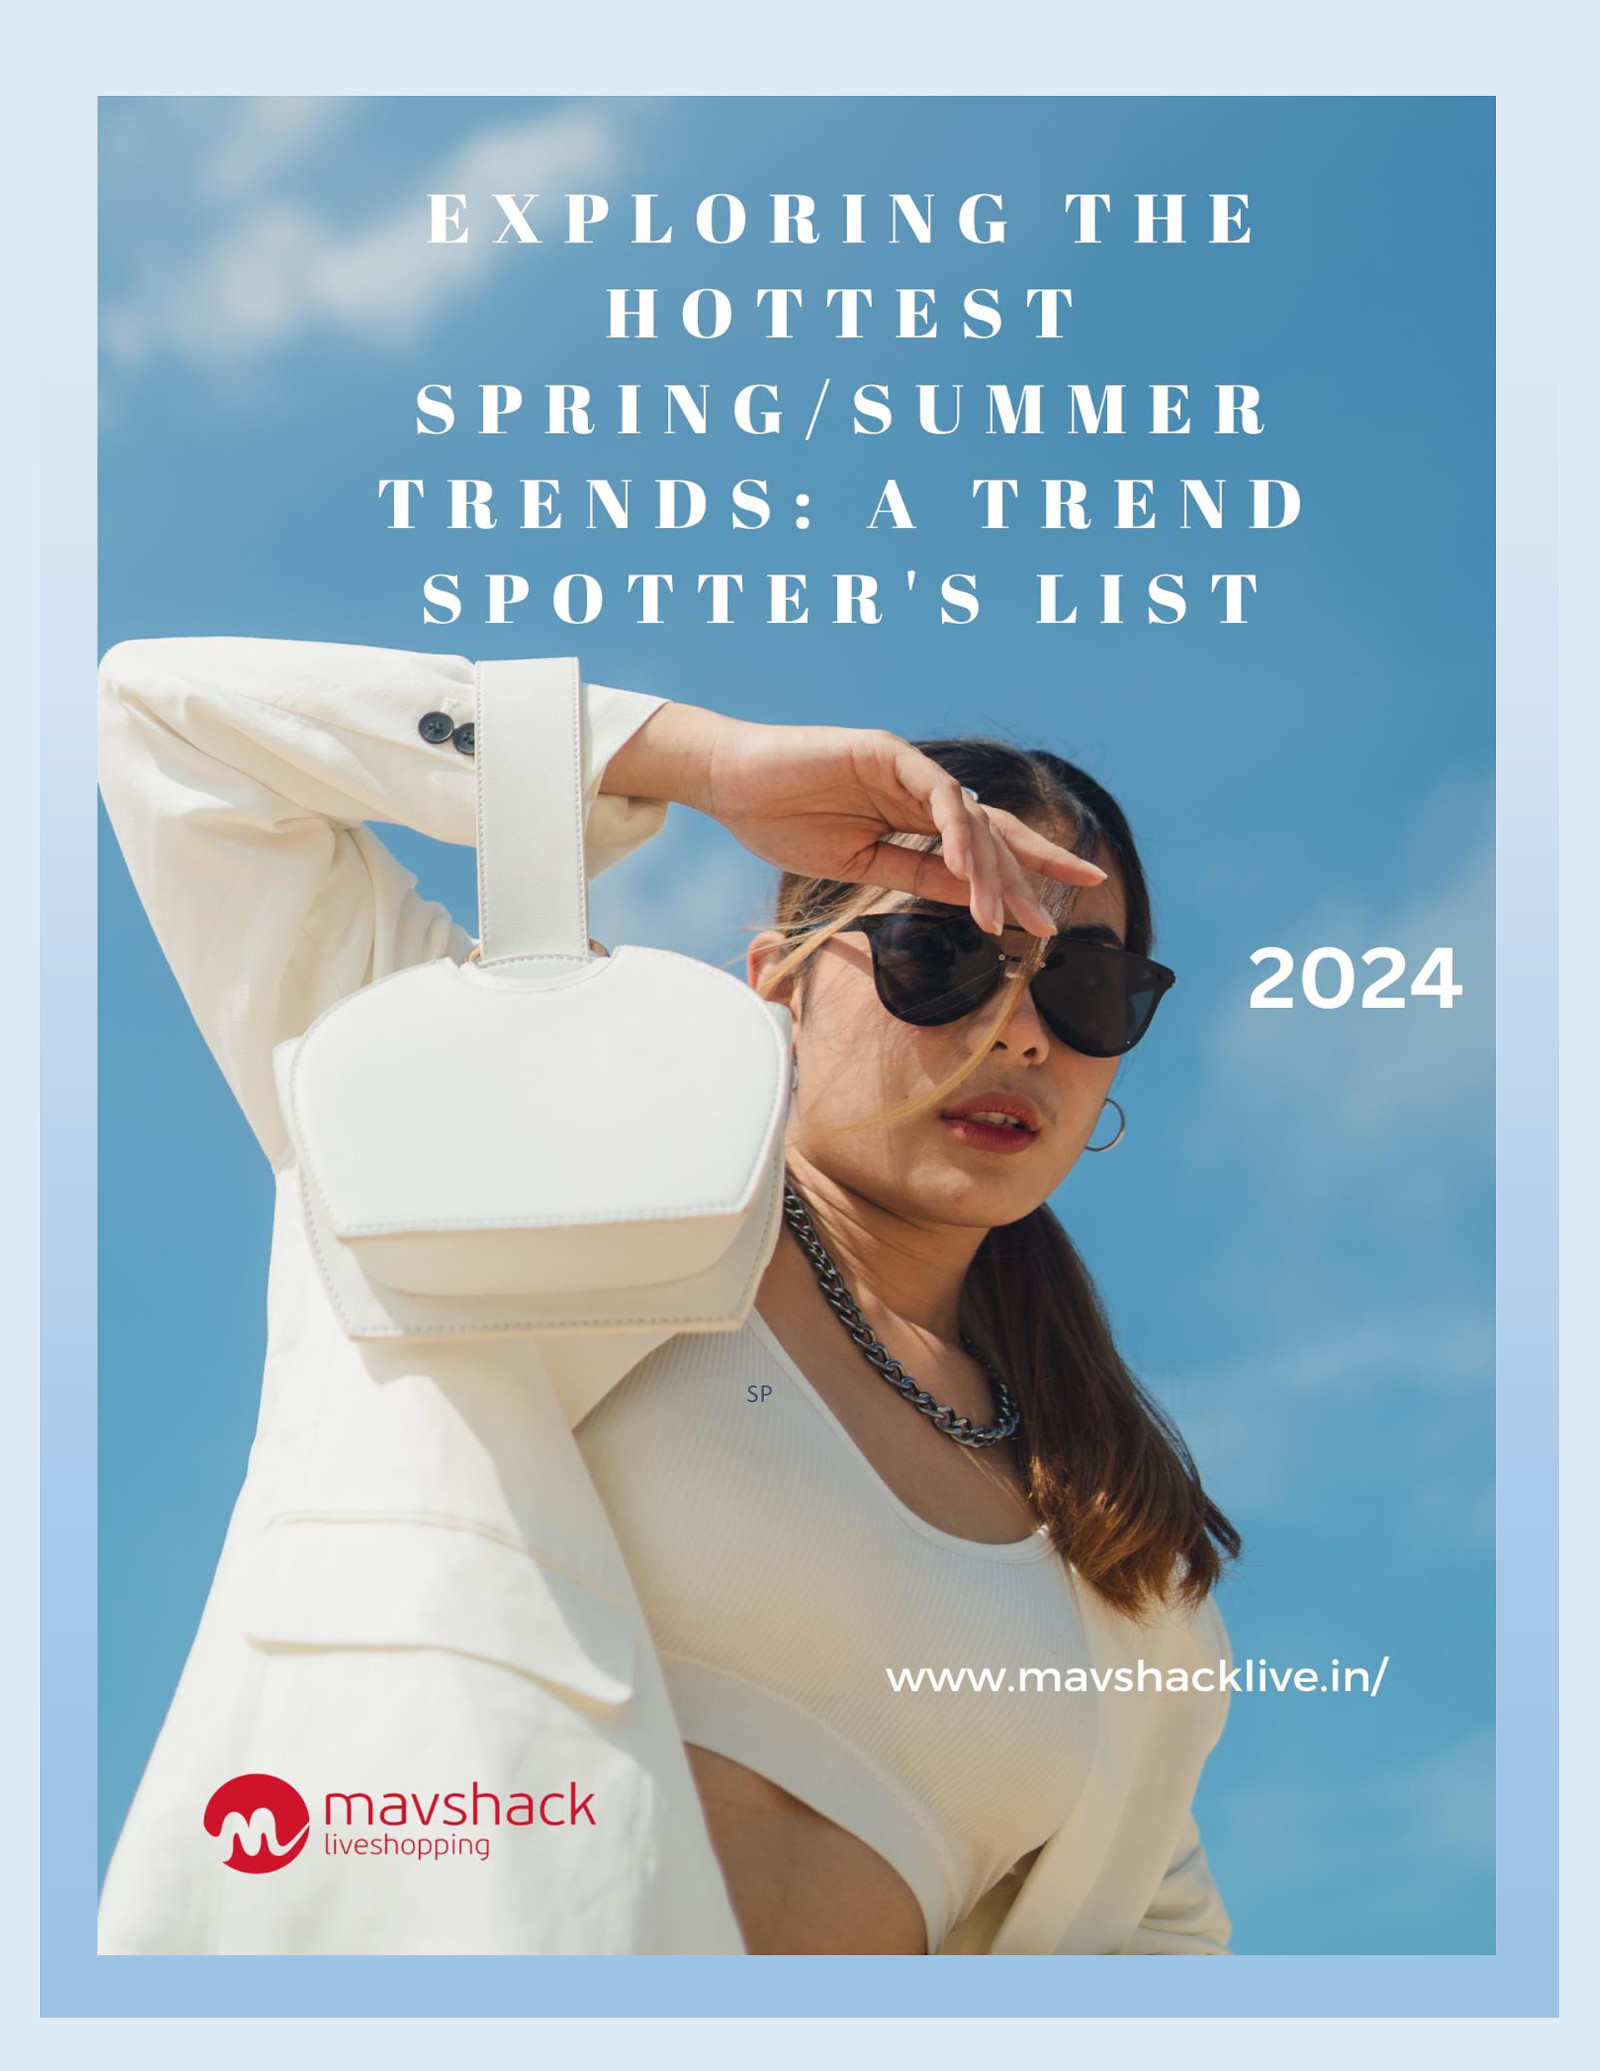 Exploring the Hottest Spring/Summer 2024 Trends: A Trend Spotter’s List